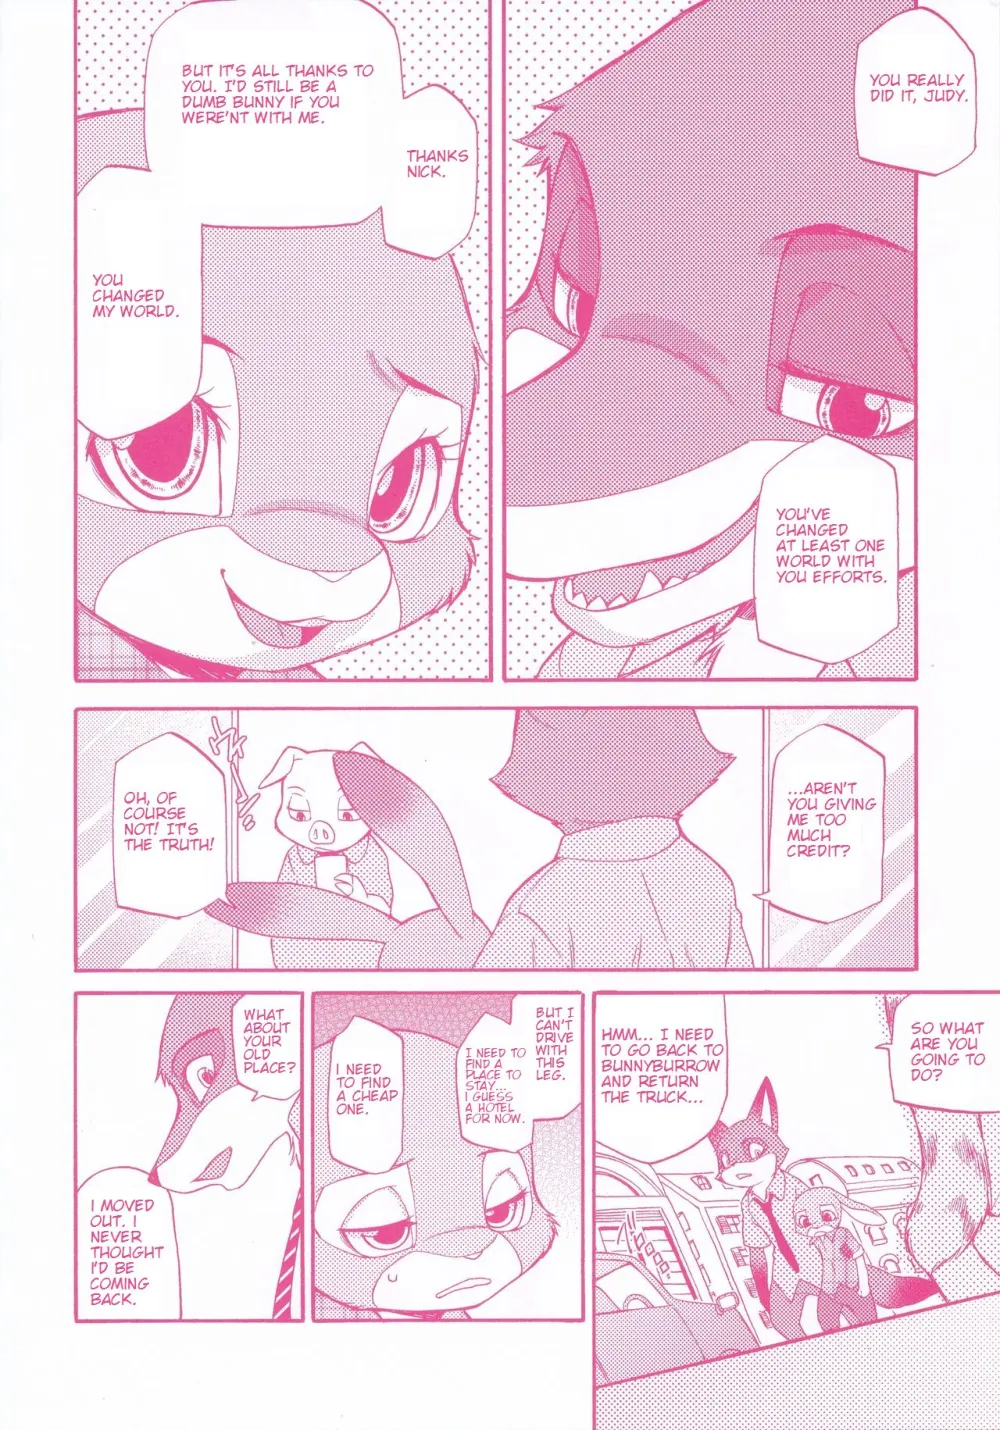 You know you love me? - Page 4